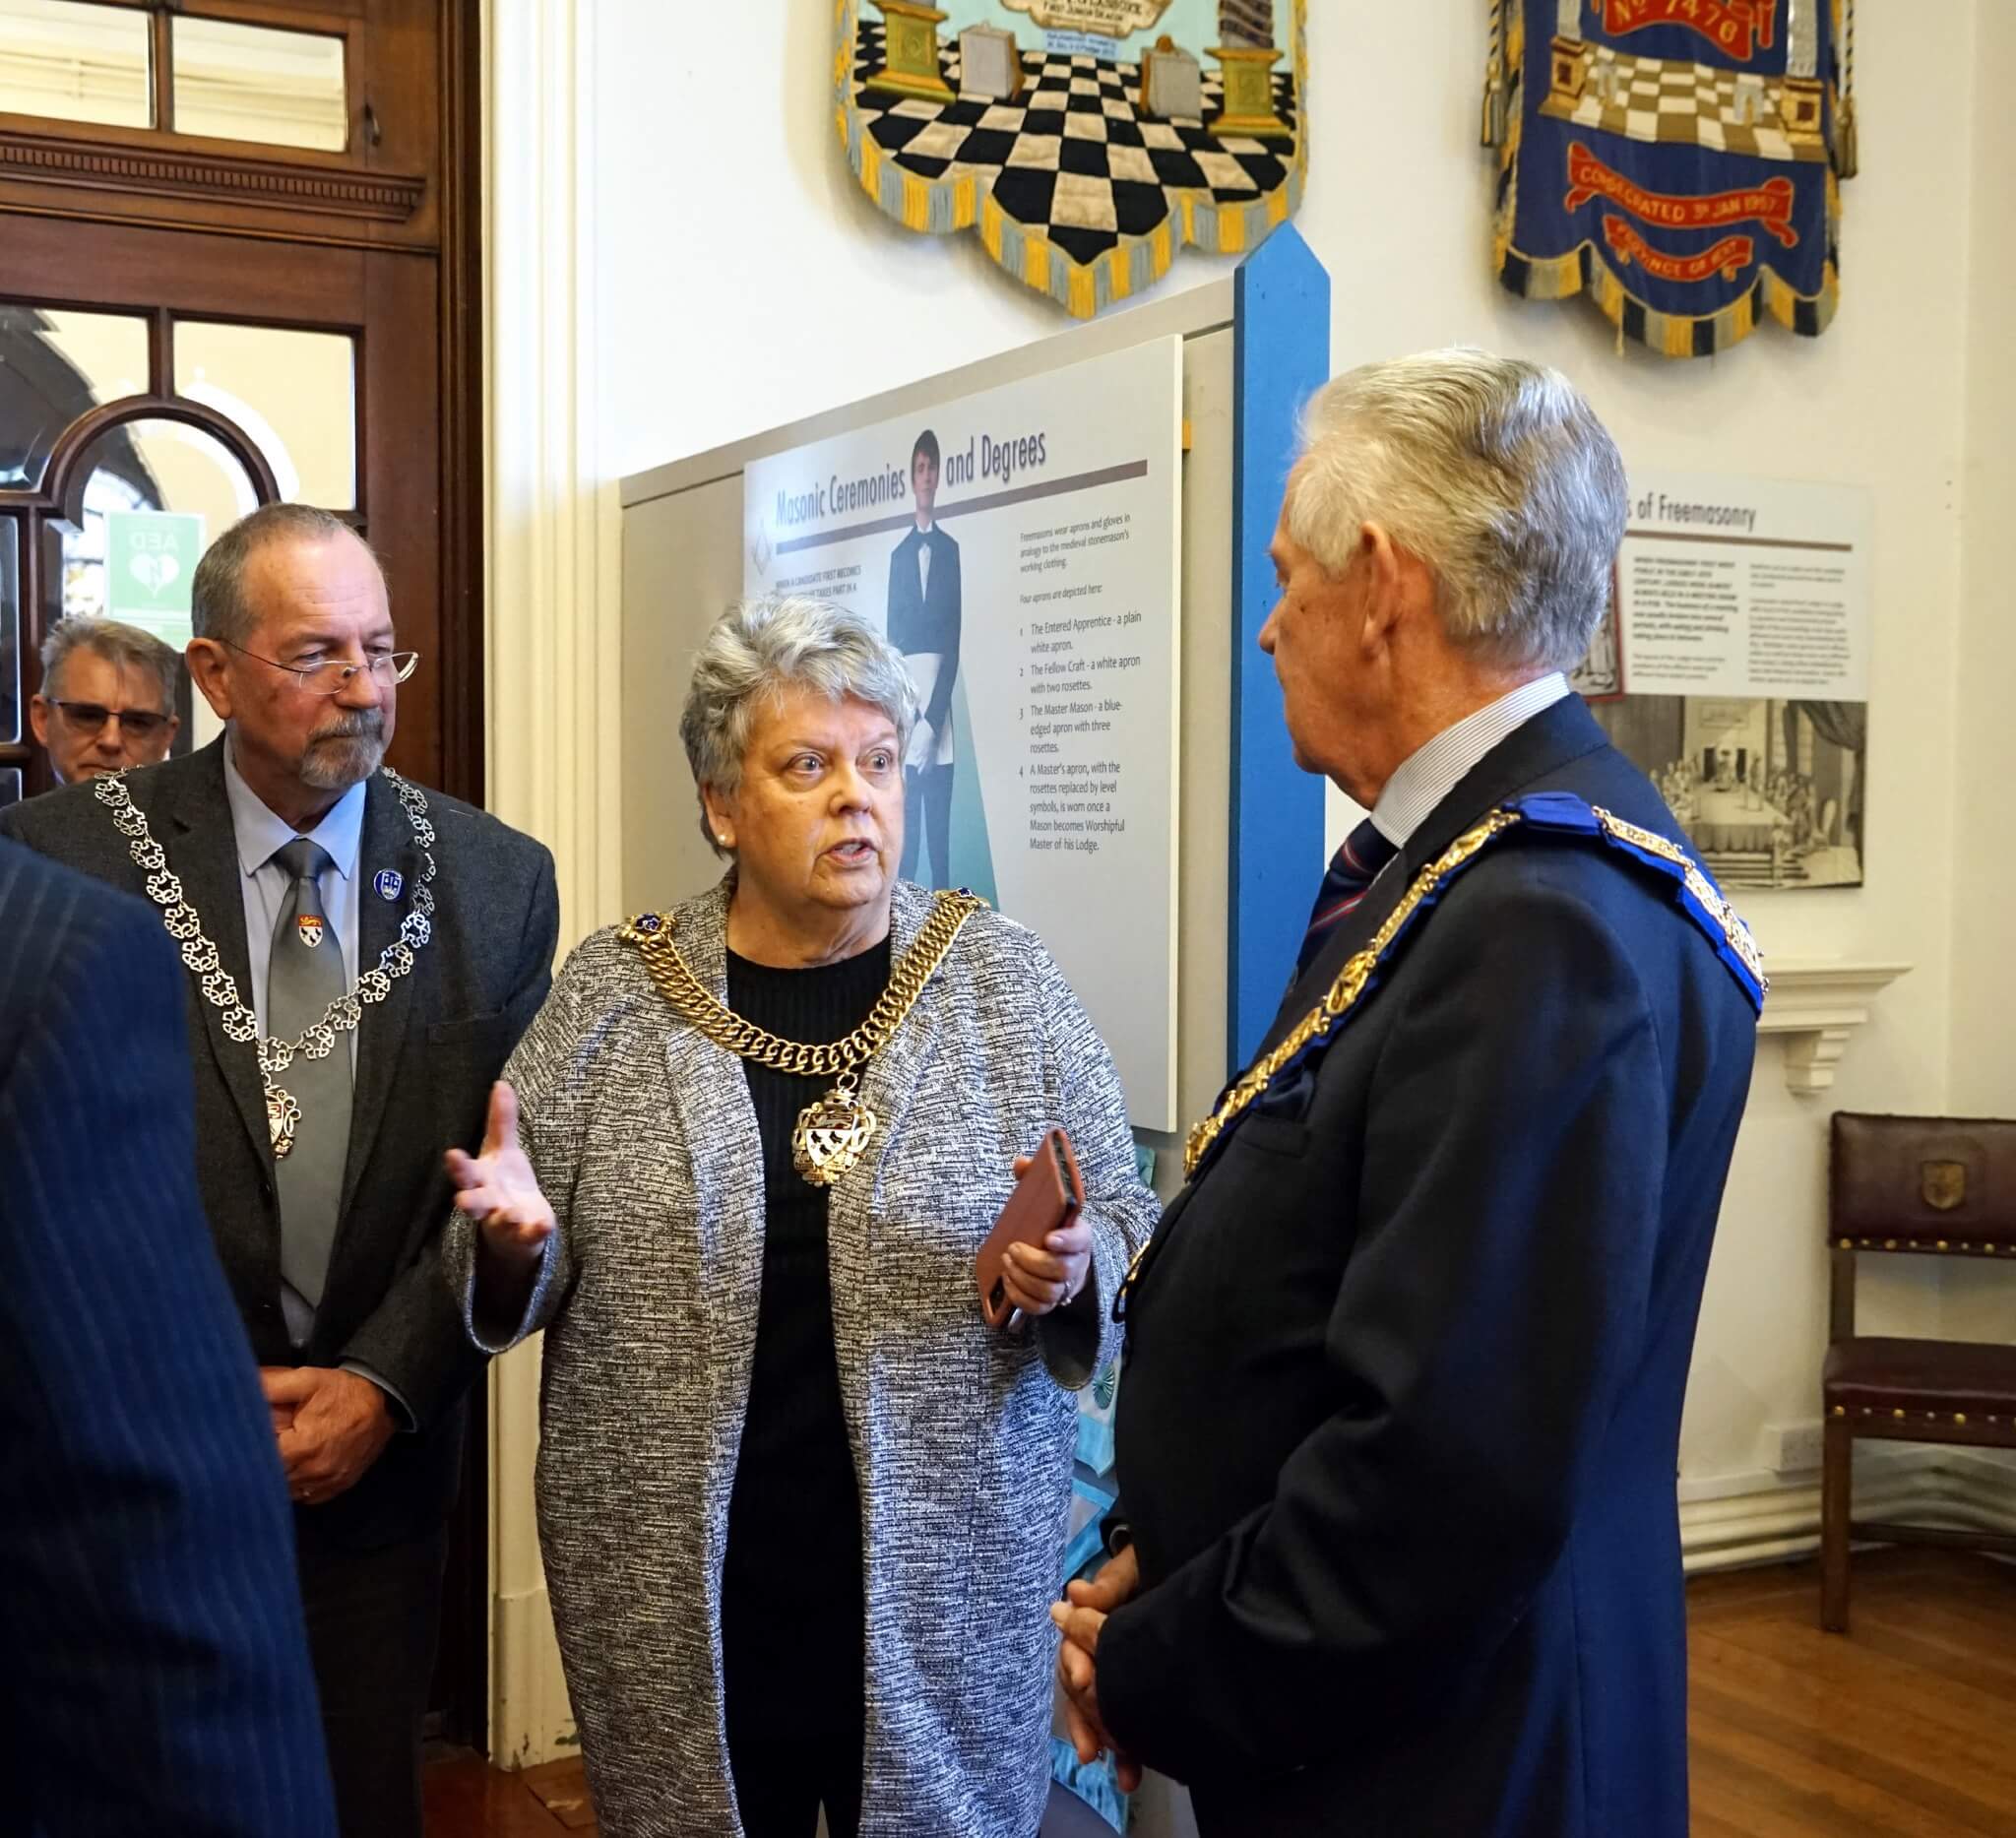 A warm welcome to the museum by the Provincial Grand Master of East Kent, Neil Hamilton Johnstone, with the Lord Mayor and her consort. 